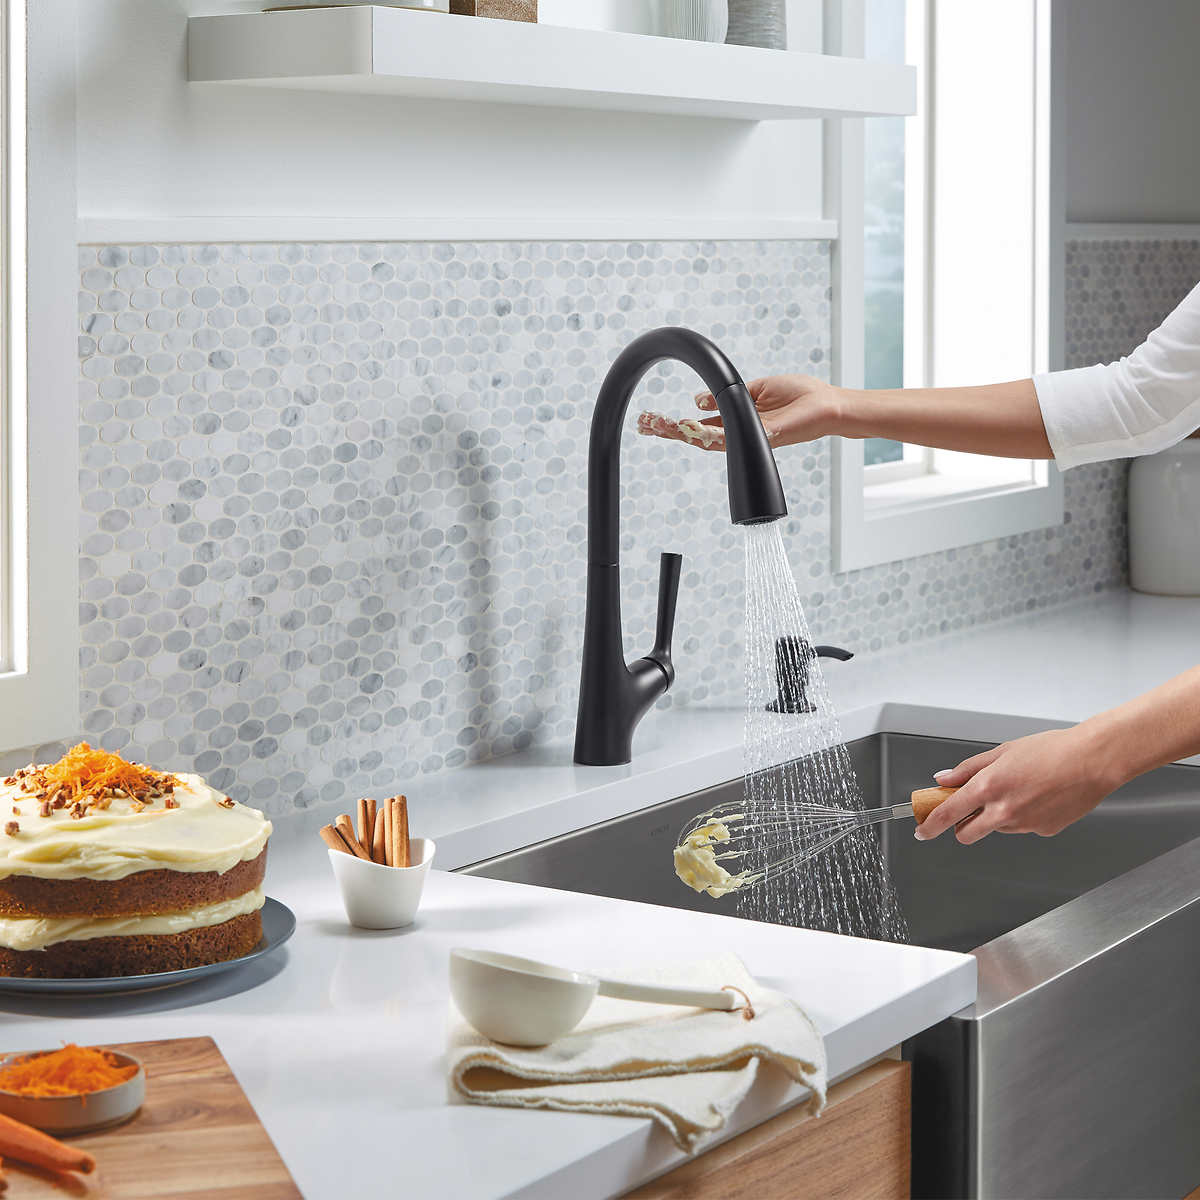 Kohler Malleco Touchless Pull Down Kitchen Faucet | Costco